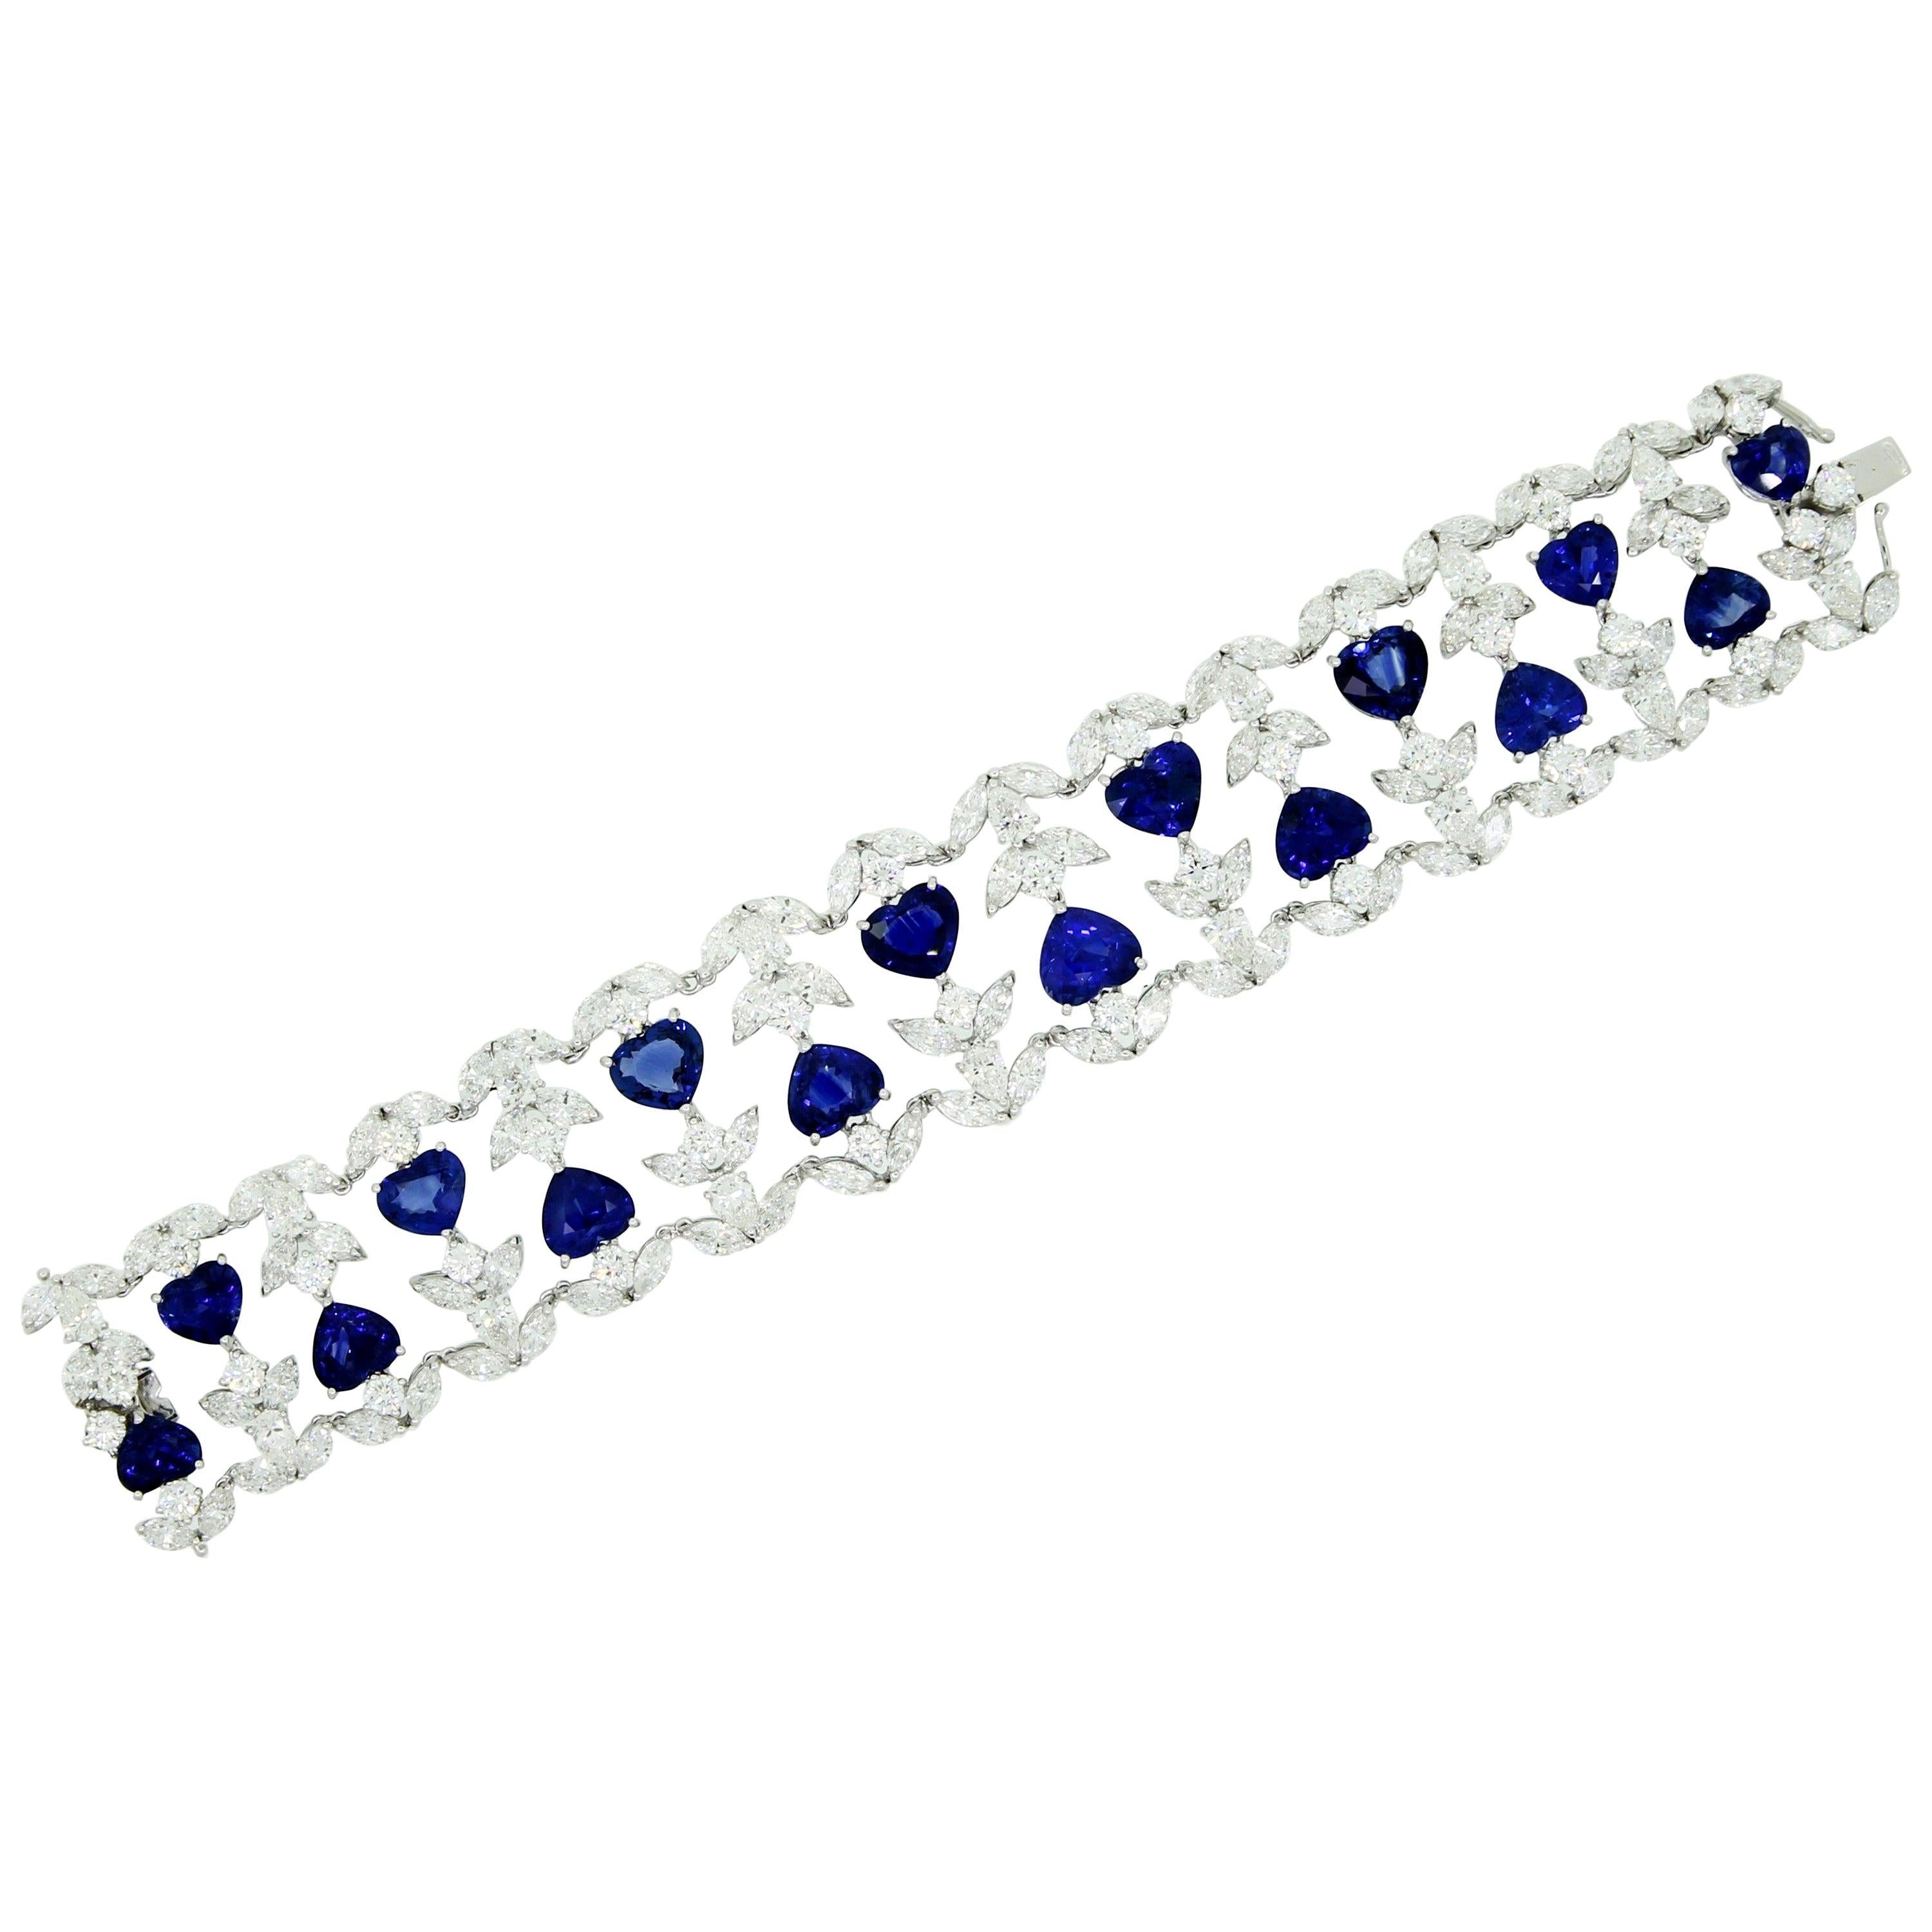 Such classical Colour Combination as Blue and White will never end.
In this sophisticated and Romantic Hand-Made Cuff Bracelet, 16 Heart Shape Blue Sapphires, for 39.45 Carata total, are framed by 146 White Pear and Marquise Diamonds, for 29.67